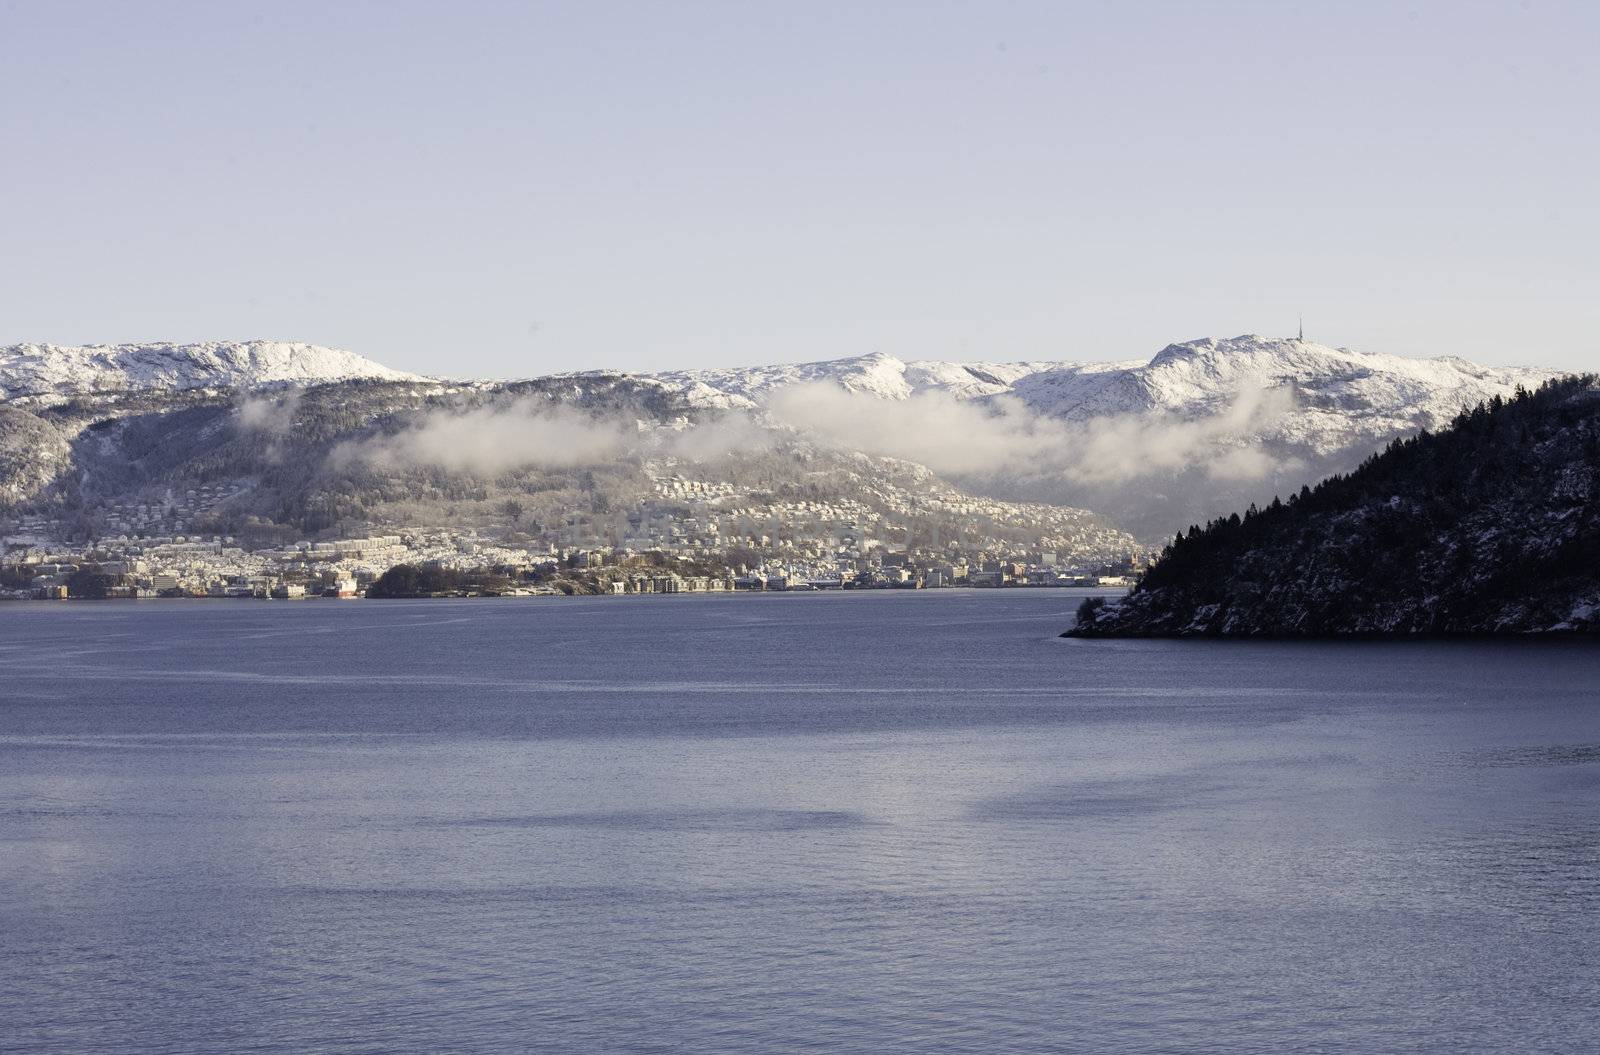 The photo i taken last in November, a dag after the snow and winter arrive Bergen in 2008